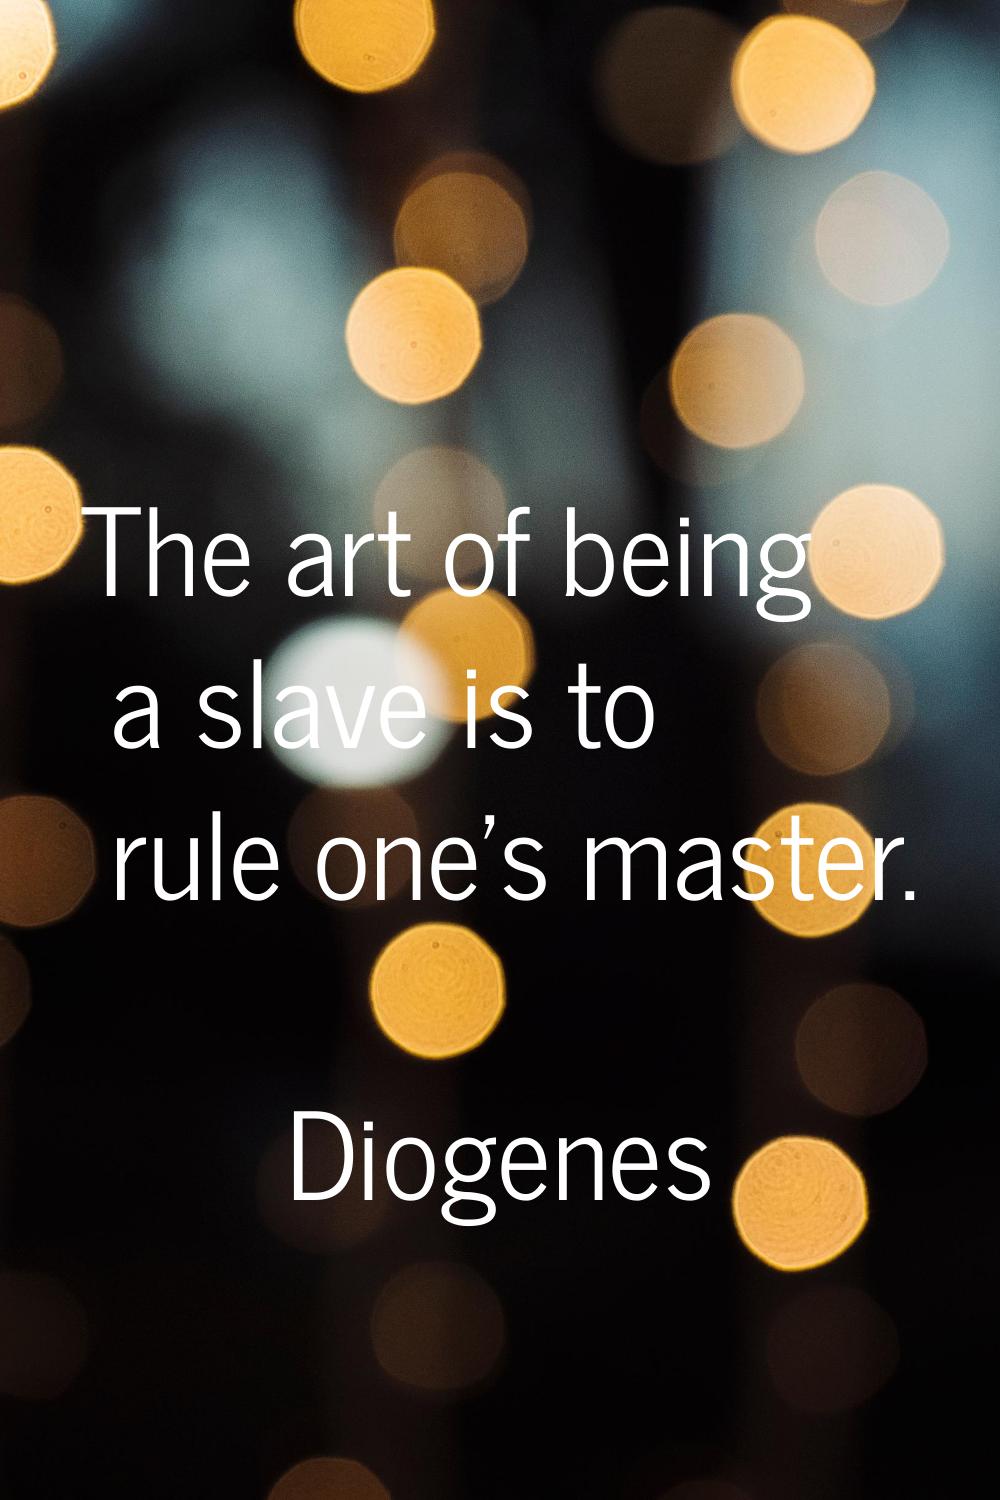 The art of being a slave is to rule one's master.